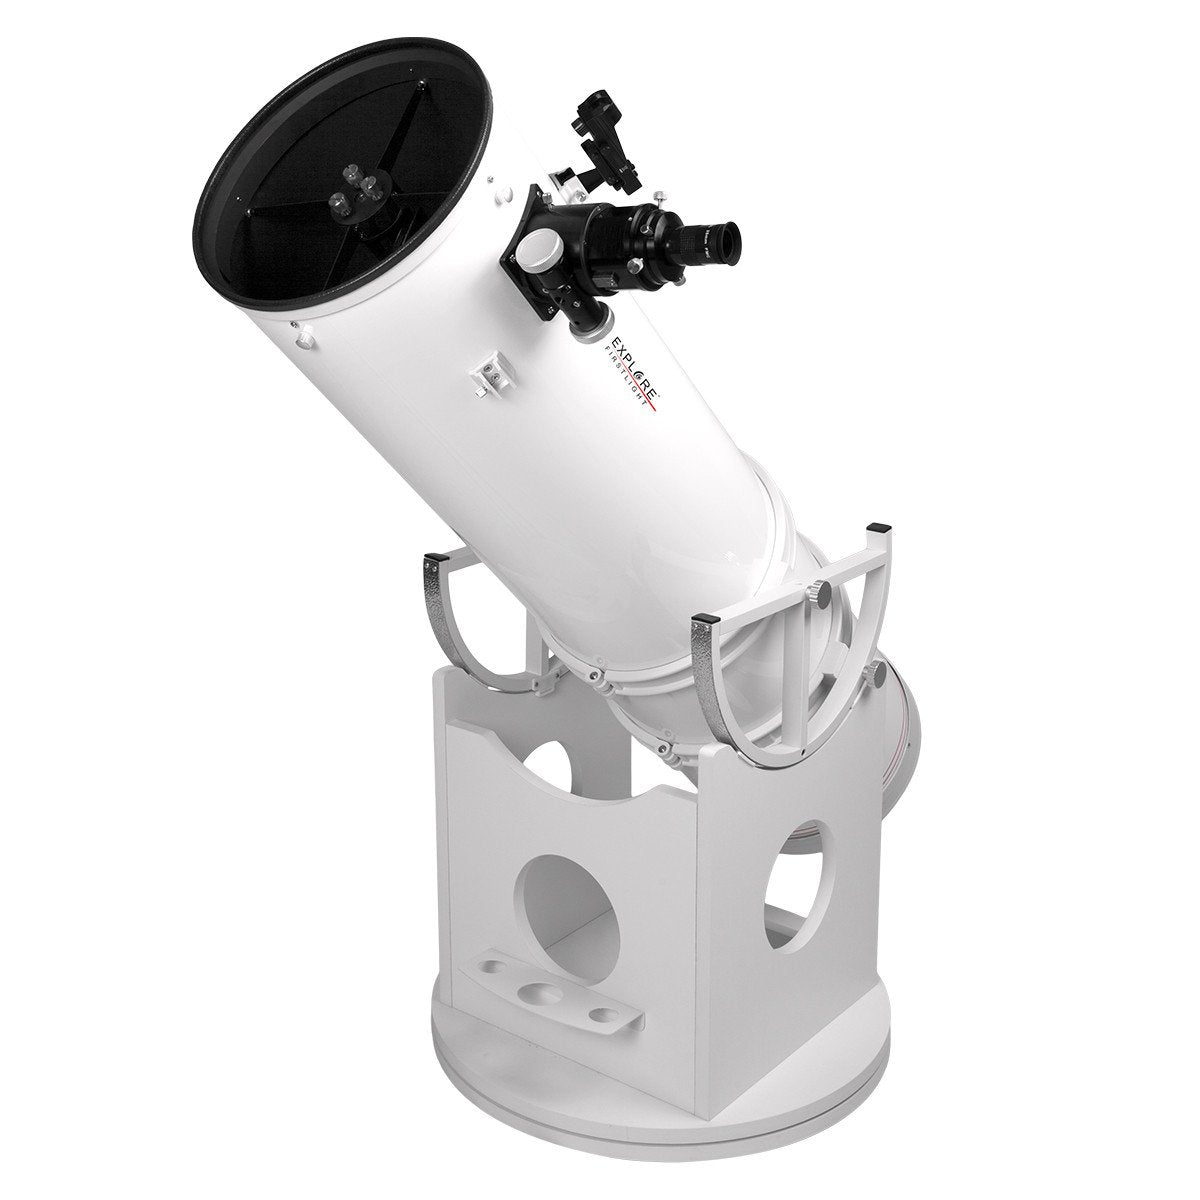 Explore FirstLight 10 Dobsonian – Astronomers Without Borders